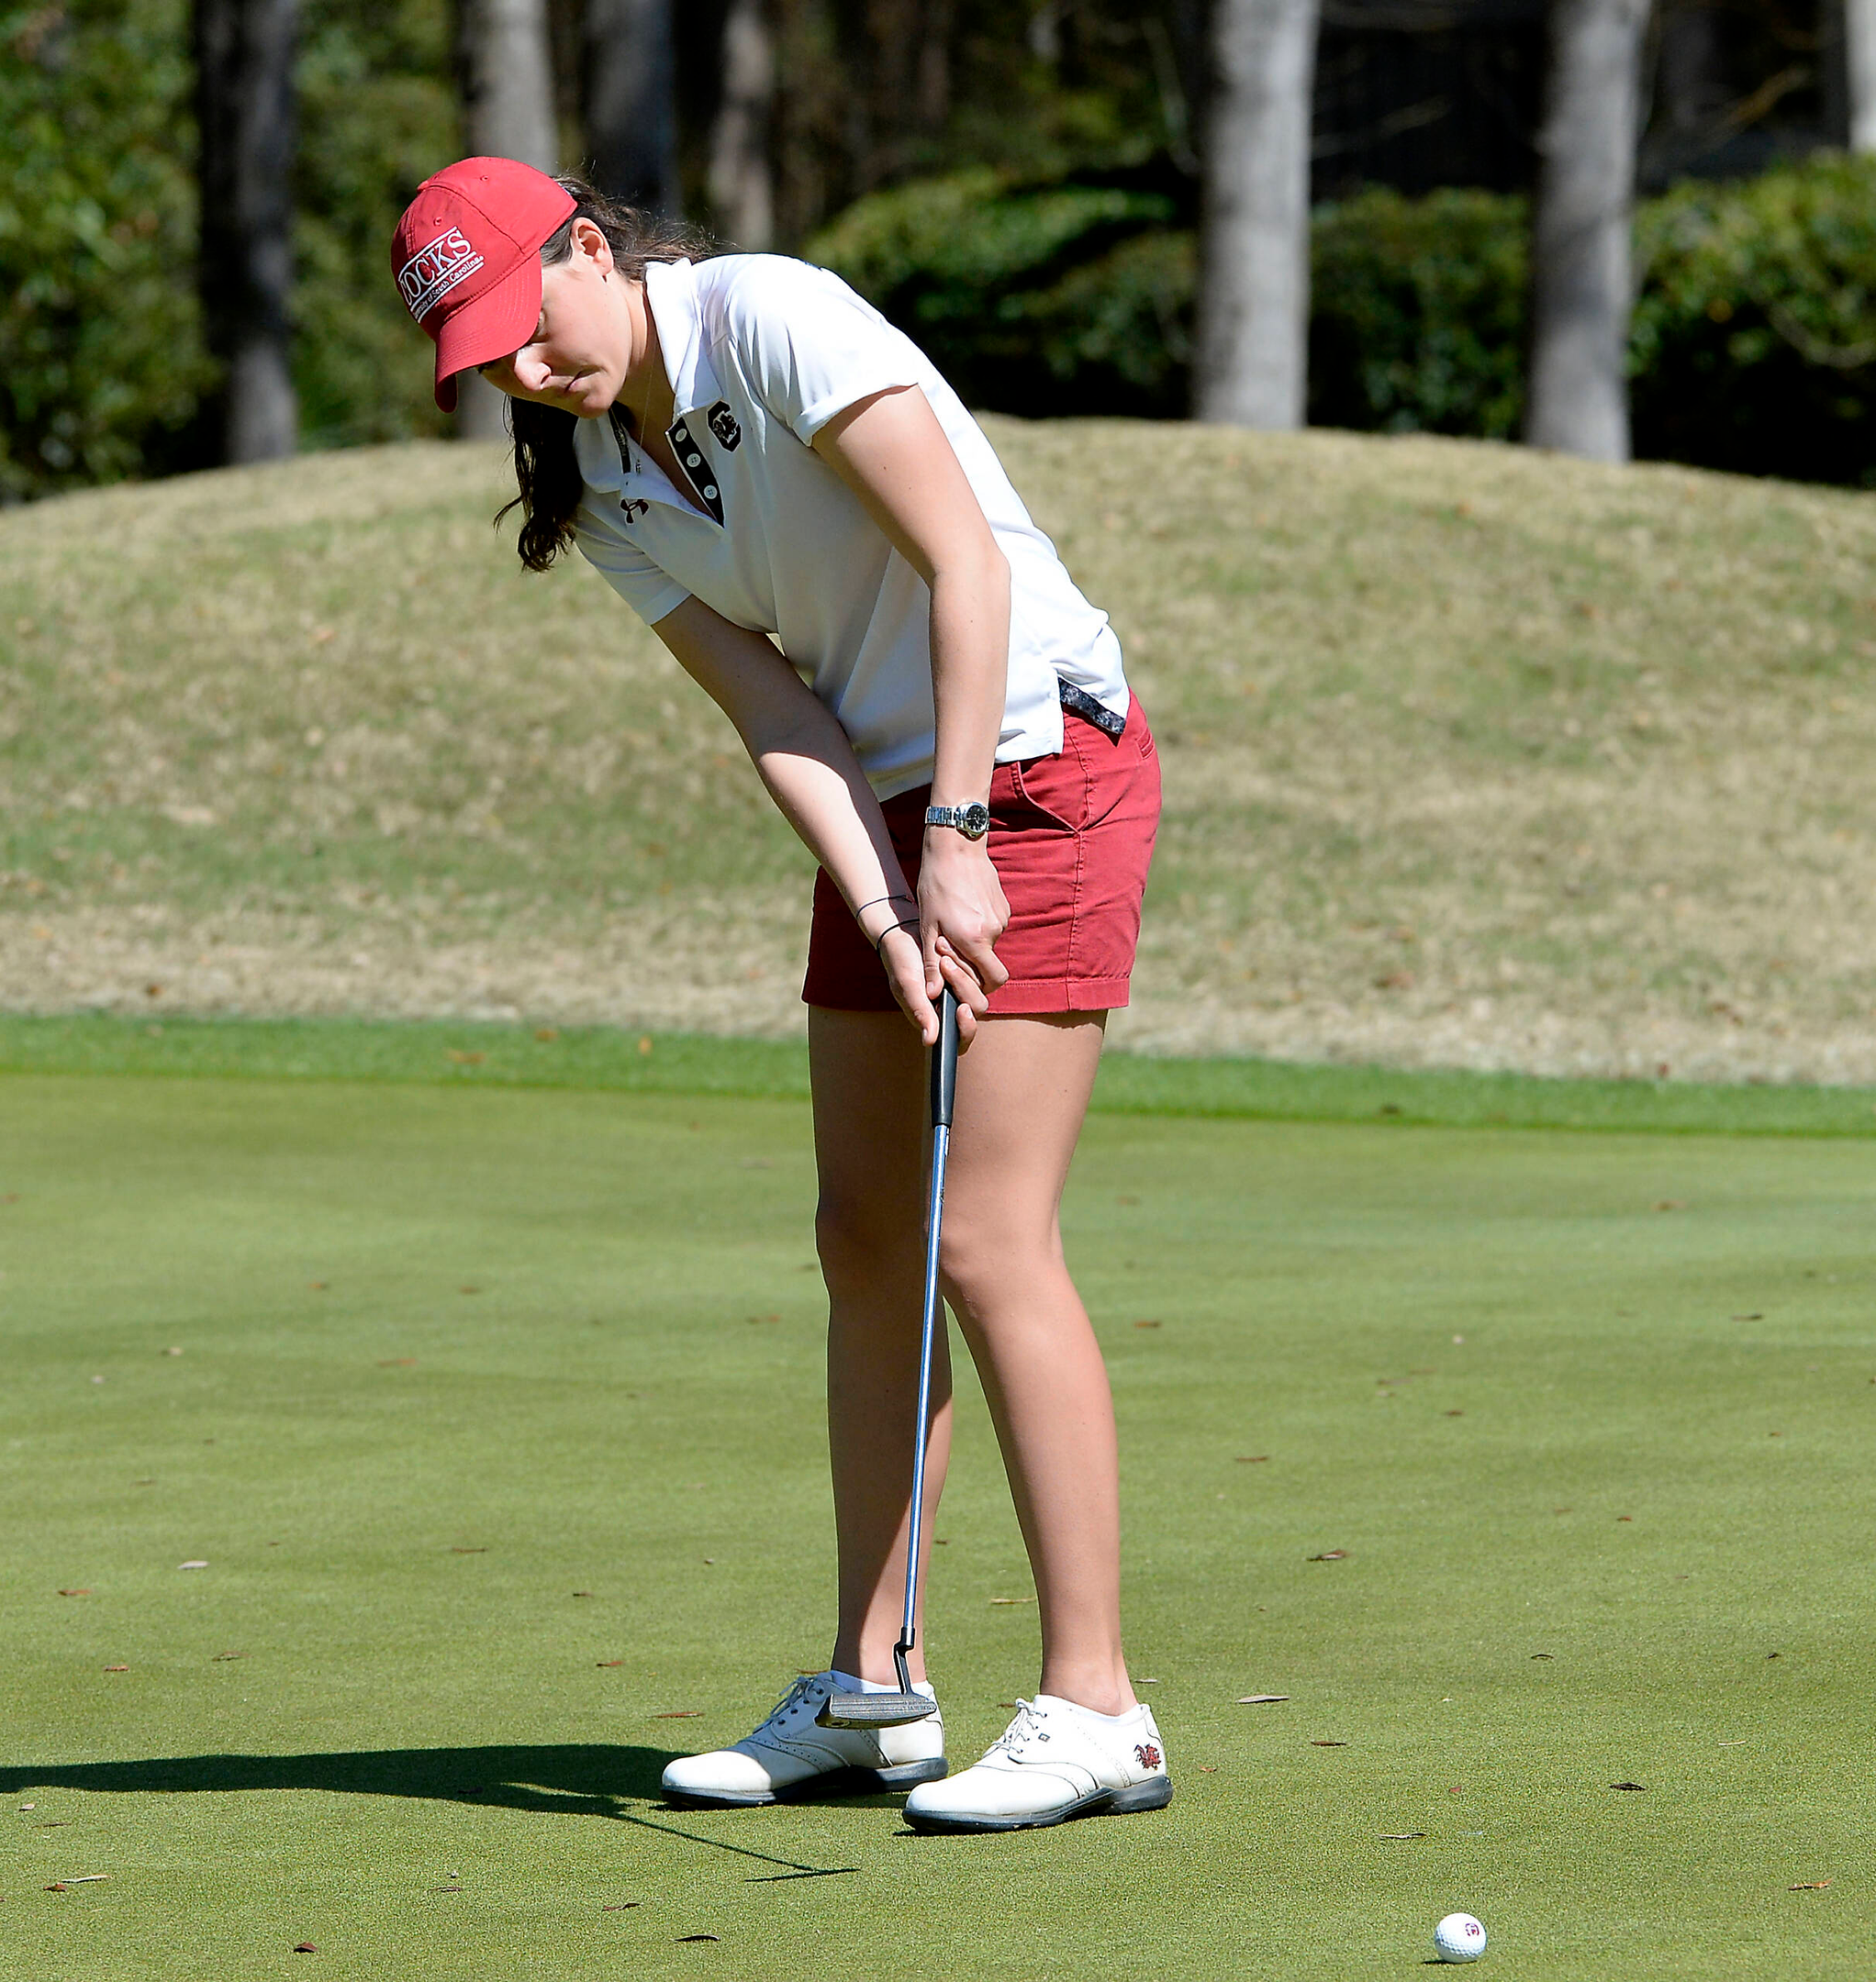 Gamecocks in Sixth Place After Two Rounds at the SEC Championship